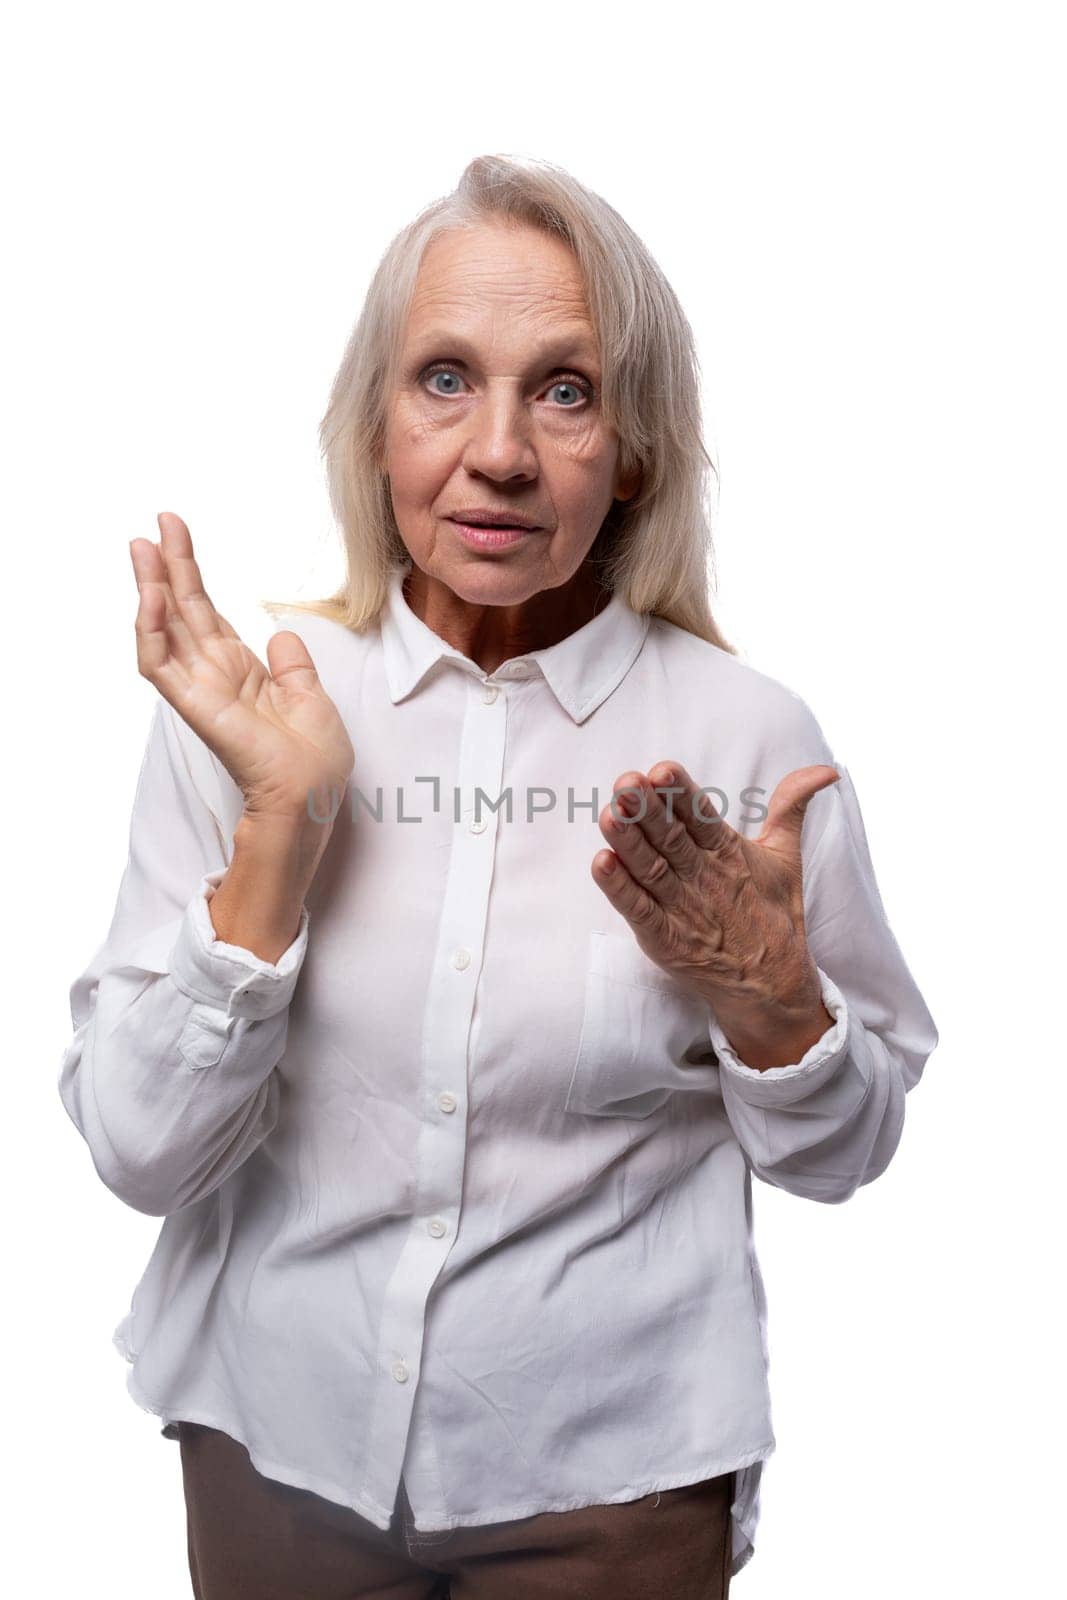 An elderly suspicious woman with gray hair looks carefully at the camera by TRMK